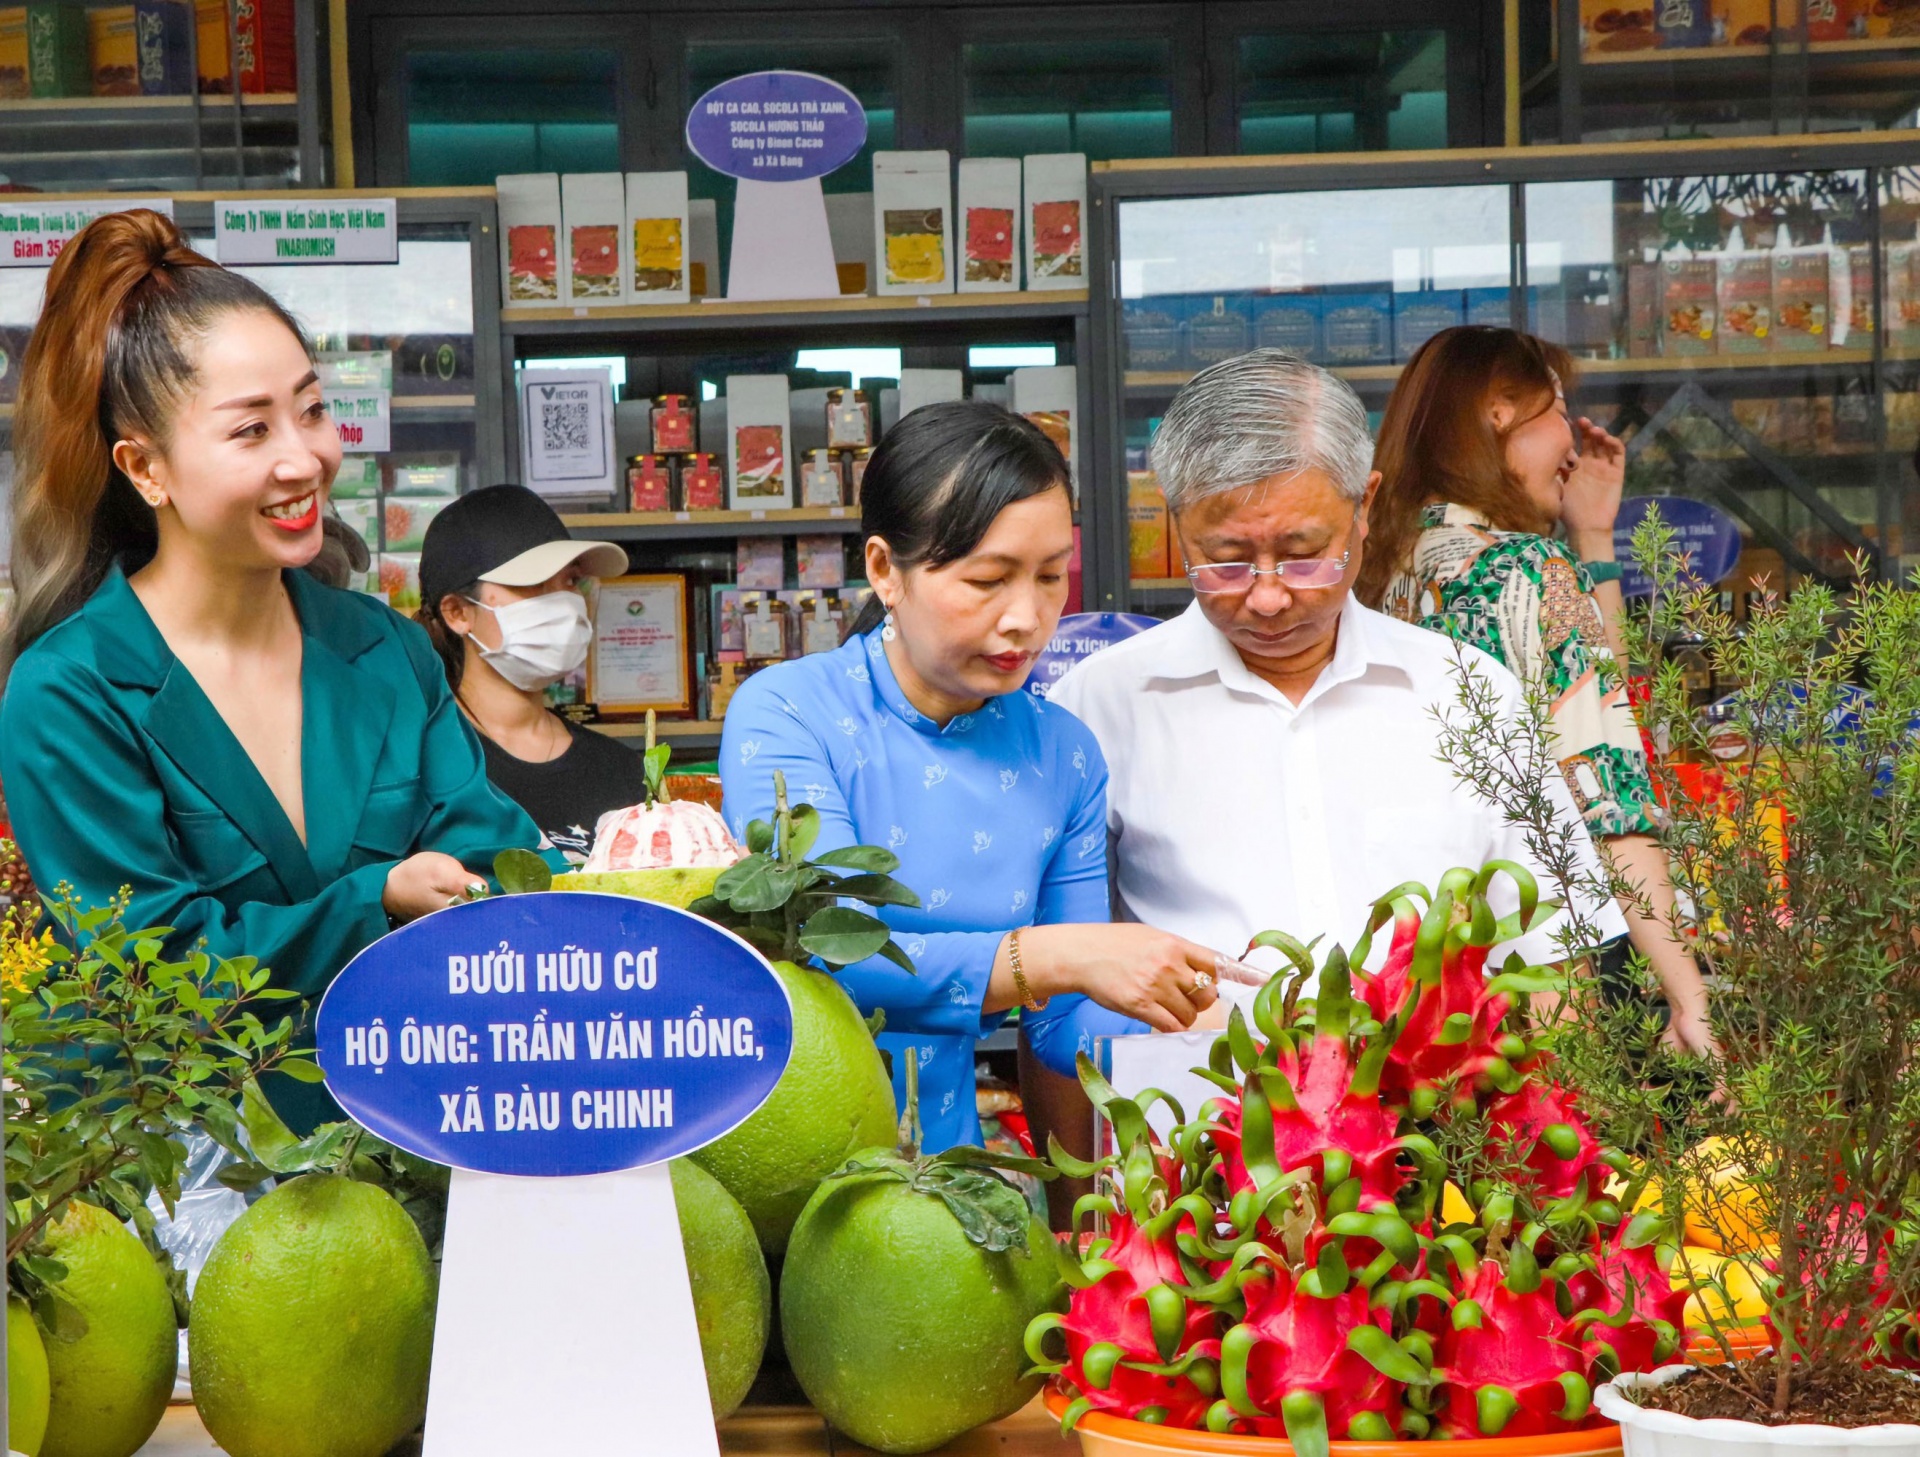 Ba Ria-Vung Tau and OCOP are changing the face of agriculture